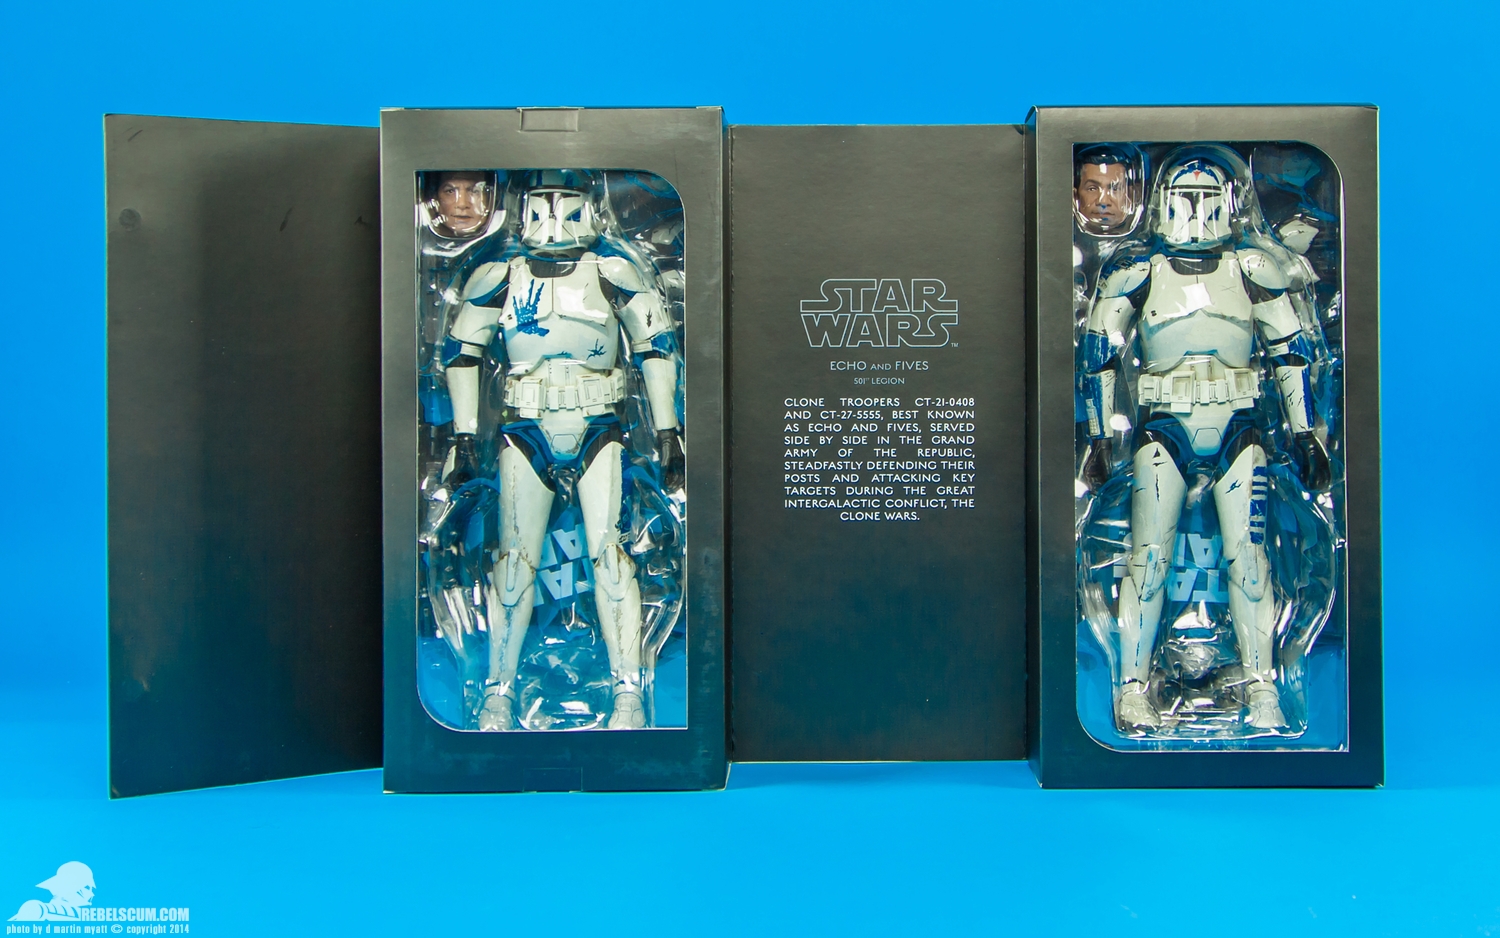 Echo-and-Fives-501st-Legion-Sixth-Scale-Sideshow-Collectibles-052.jpg